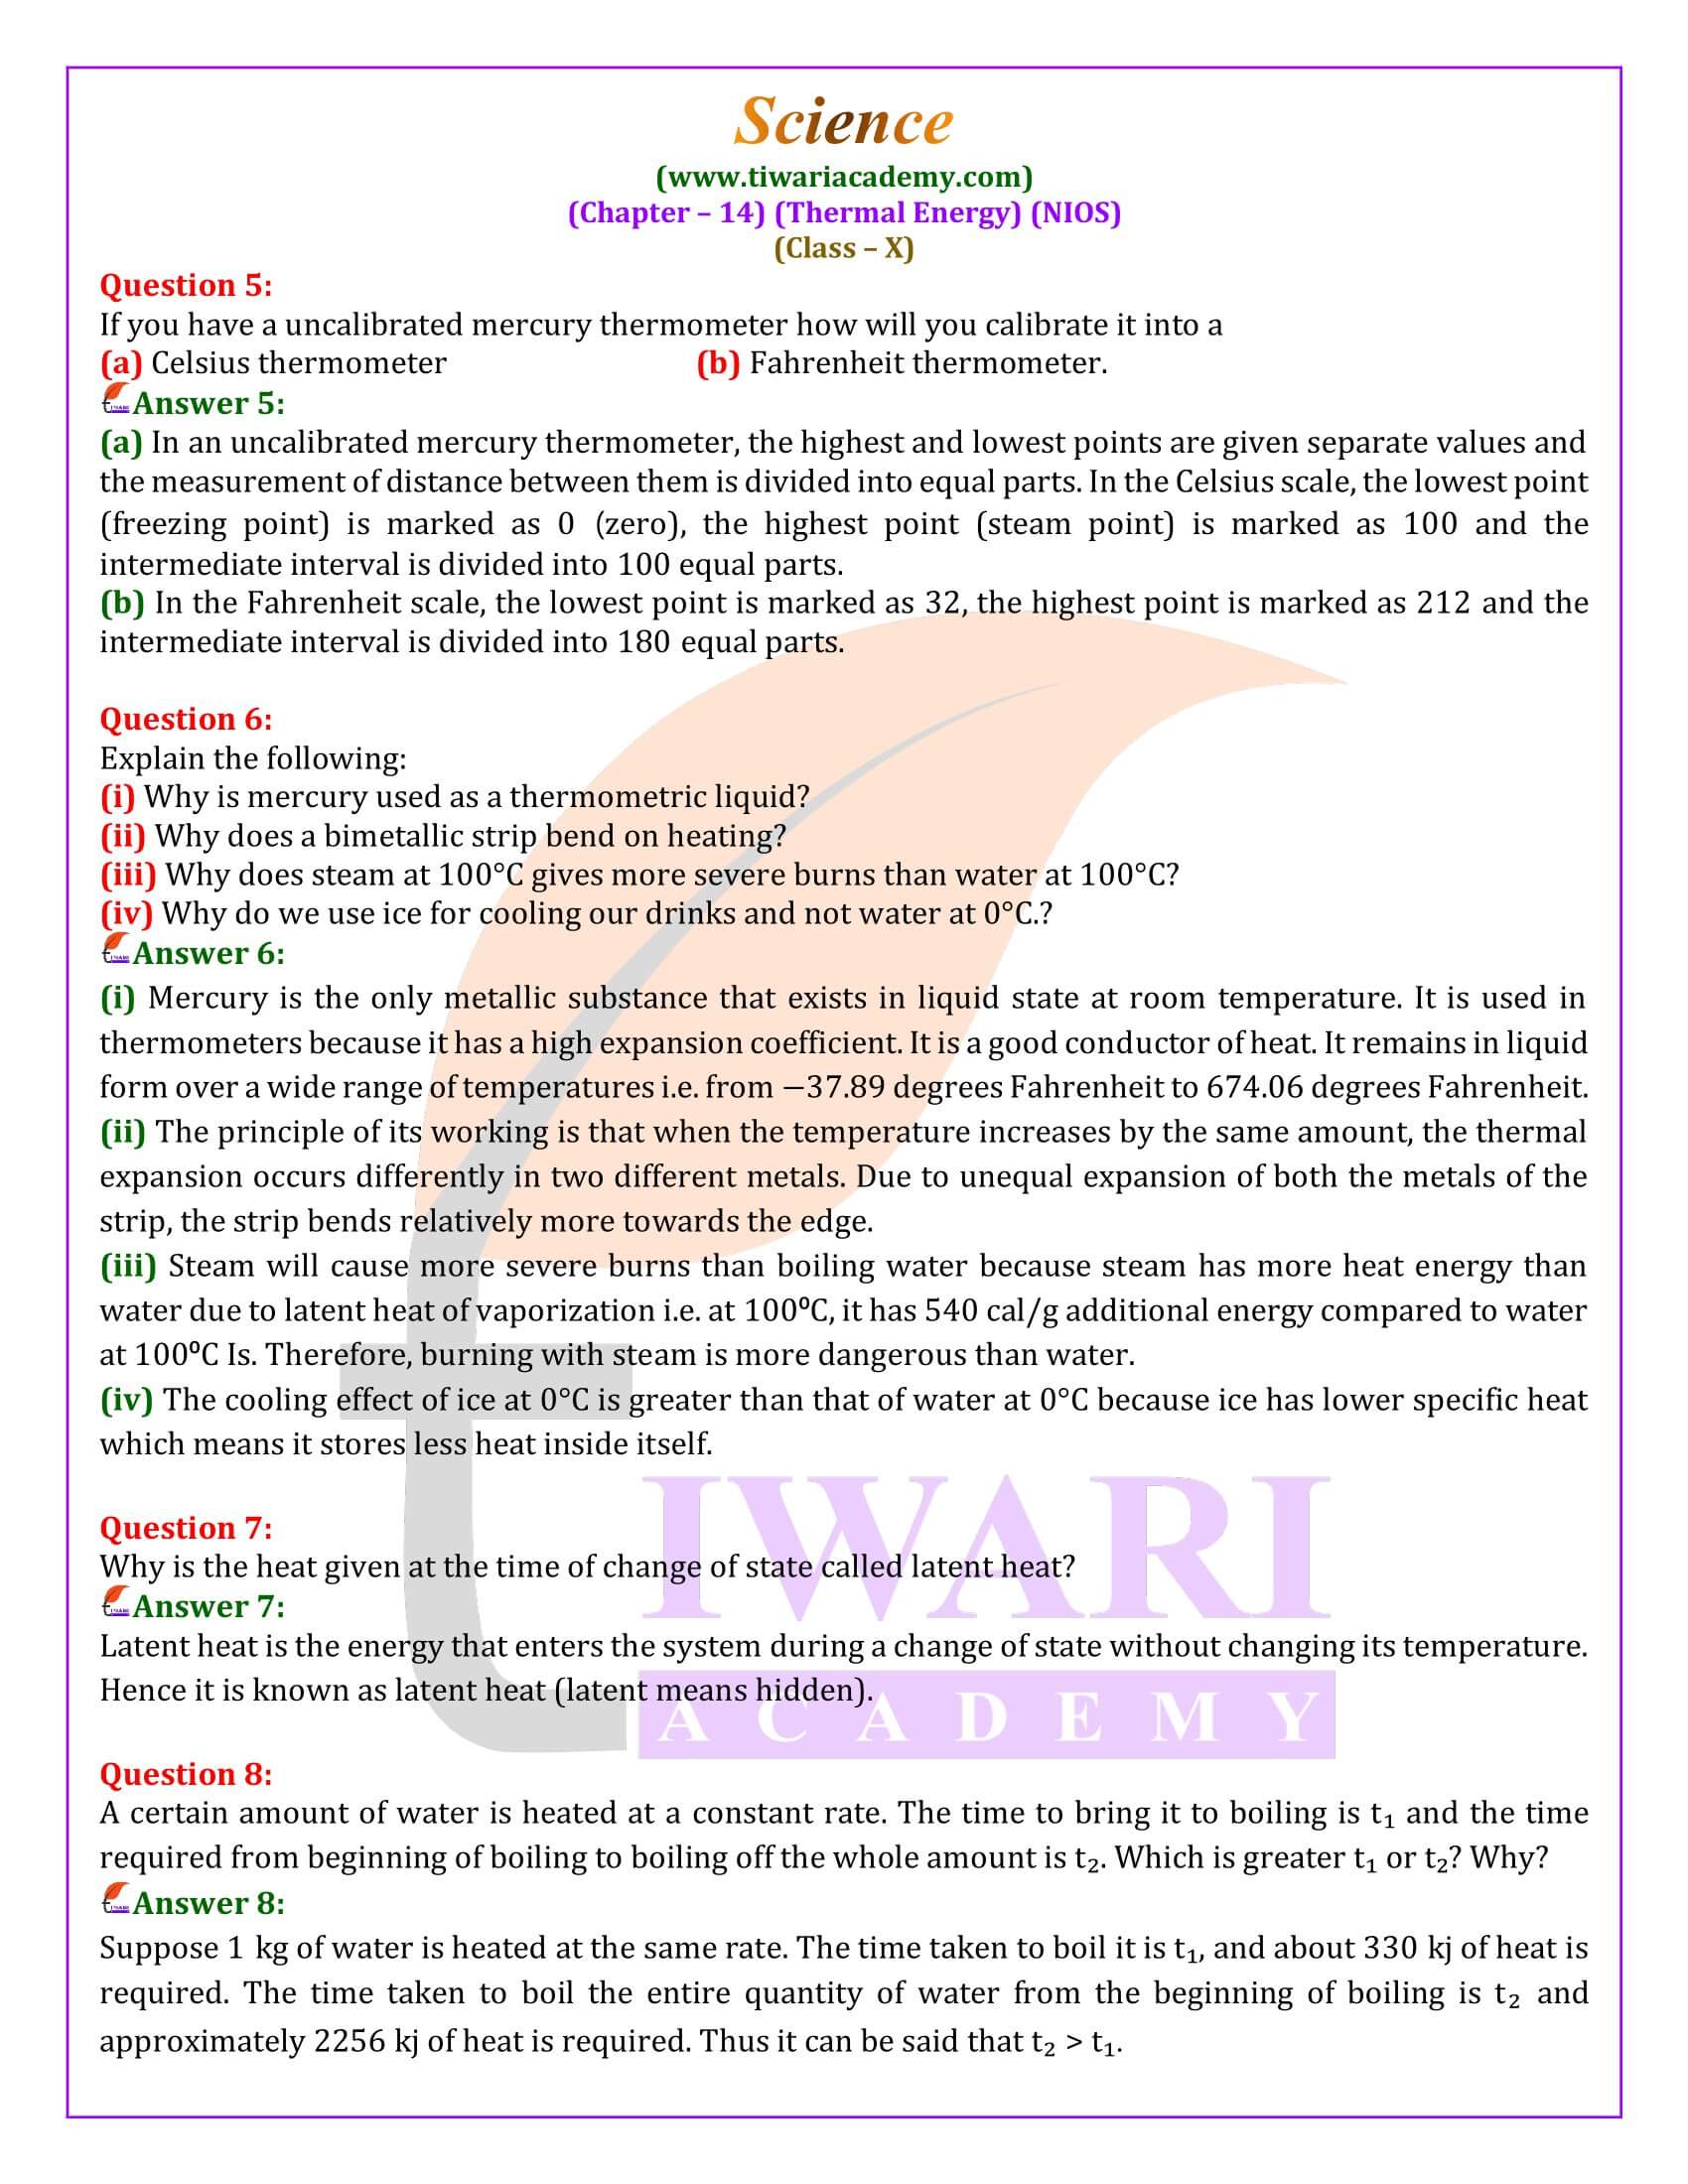 NIOS Class 10 Science Chapter 14 Thermal Energy Question Answers